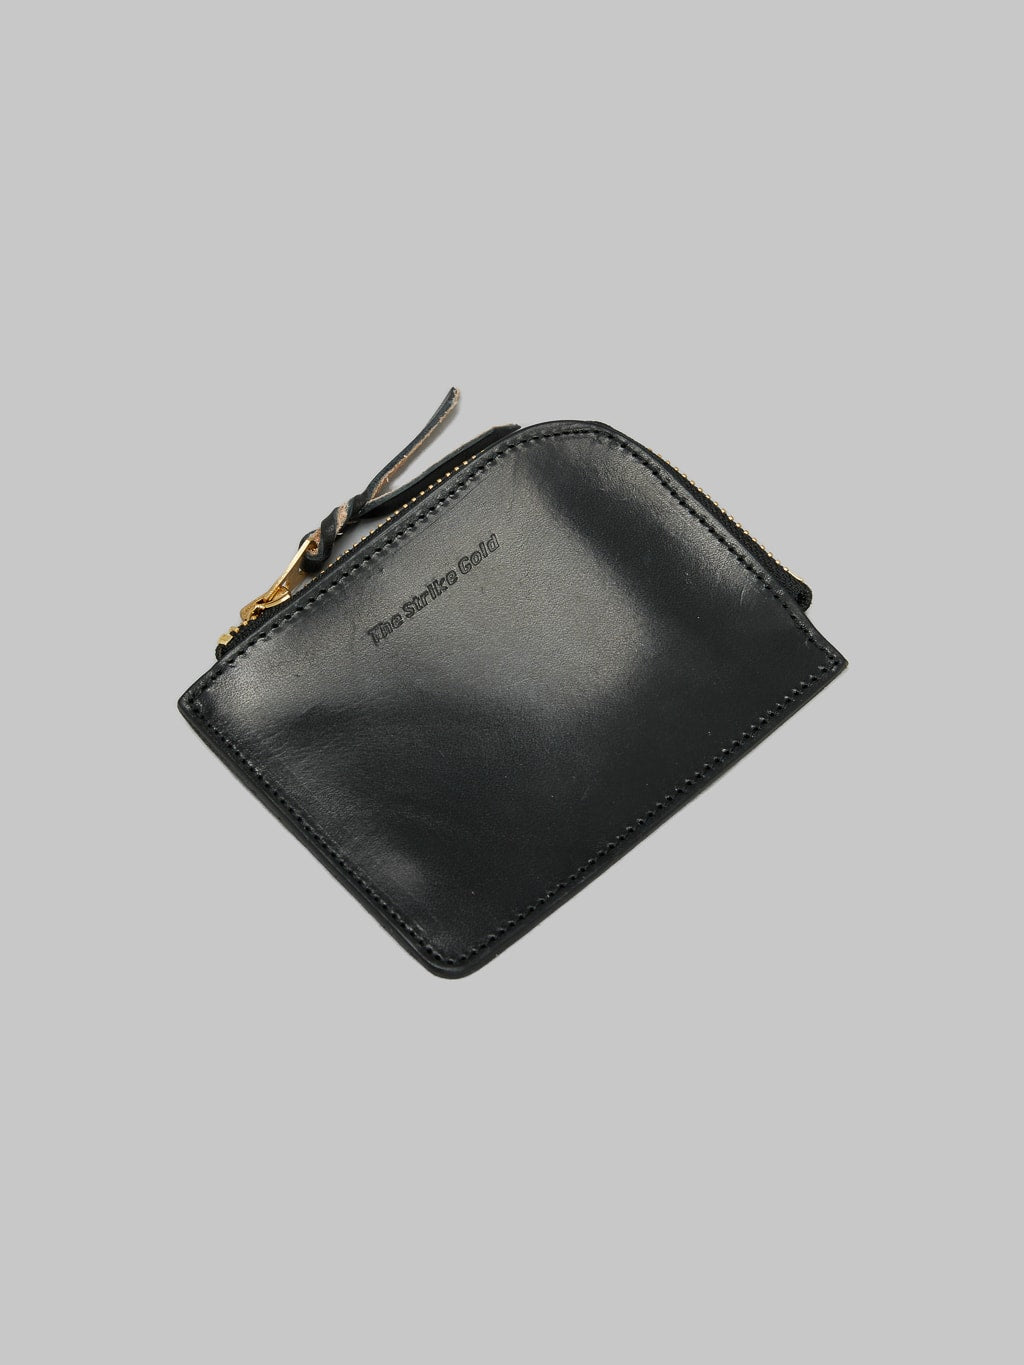 The Strike Gold Leather Zip Wallet Black front view